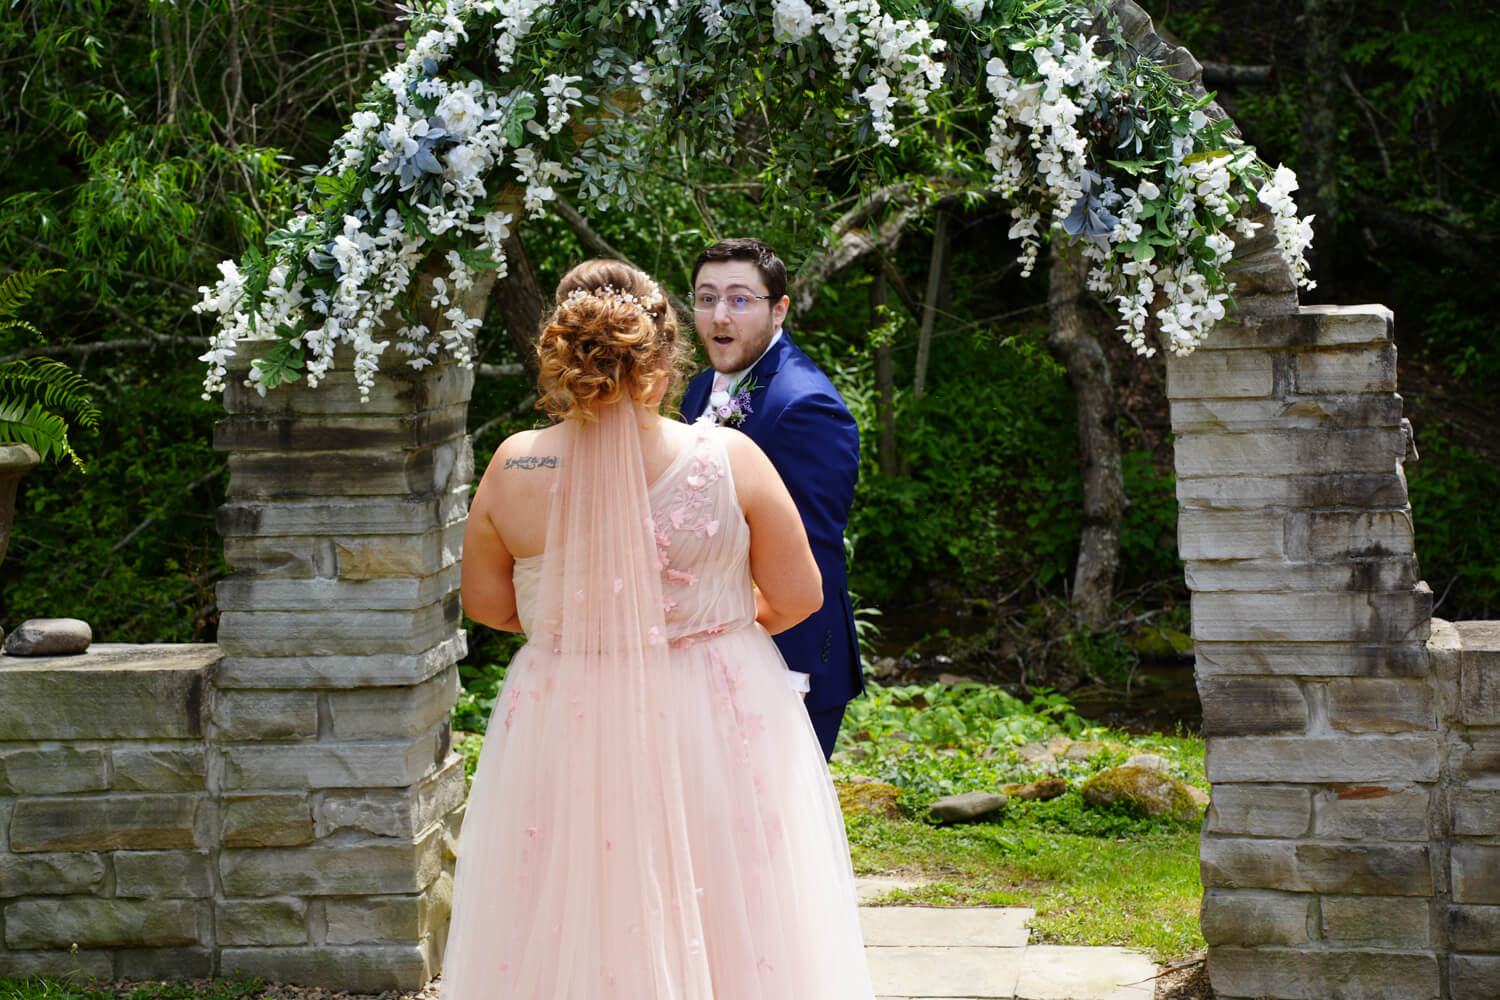 Groom in surprise seeing his bride for the first time by a stone archway